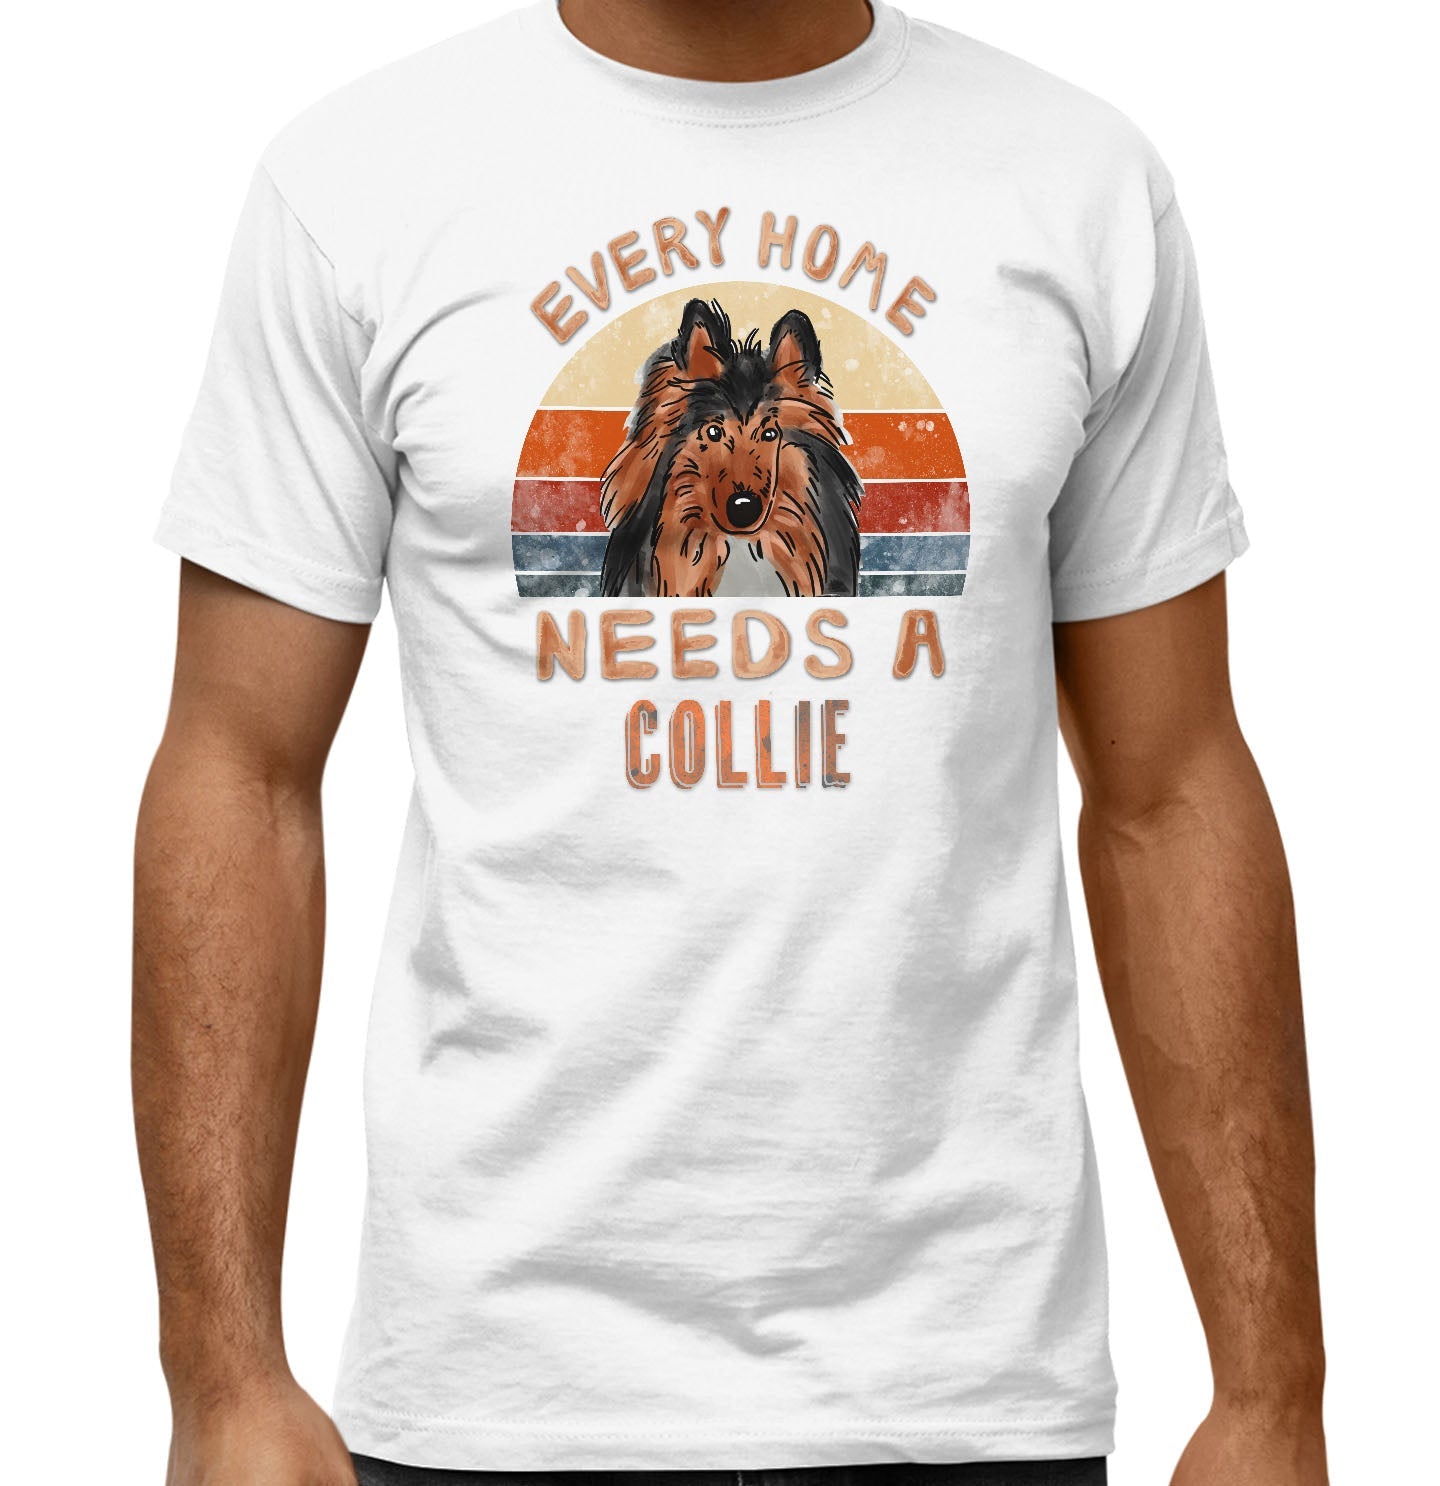 Every Home Needs a Collie - Adult Unisex T-Shirt